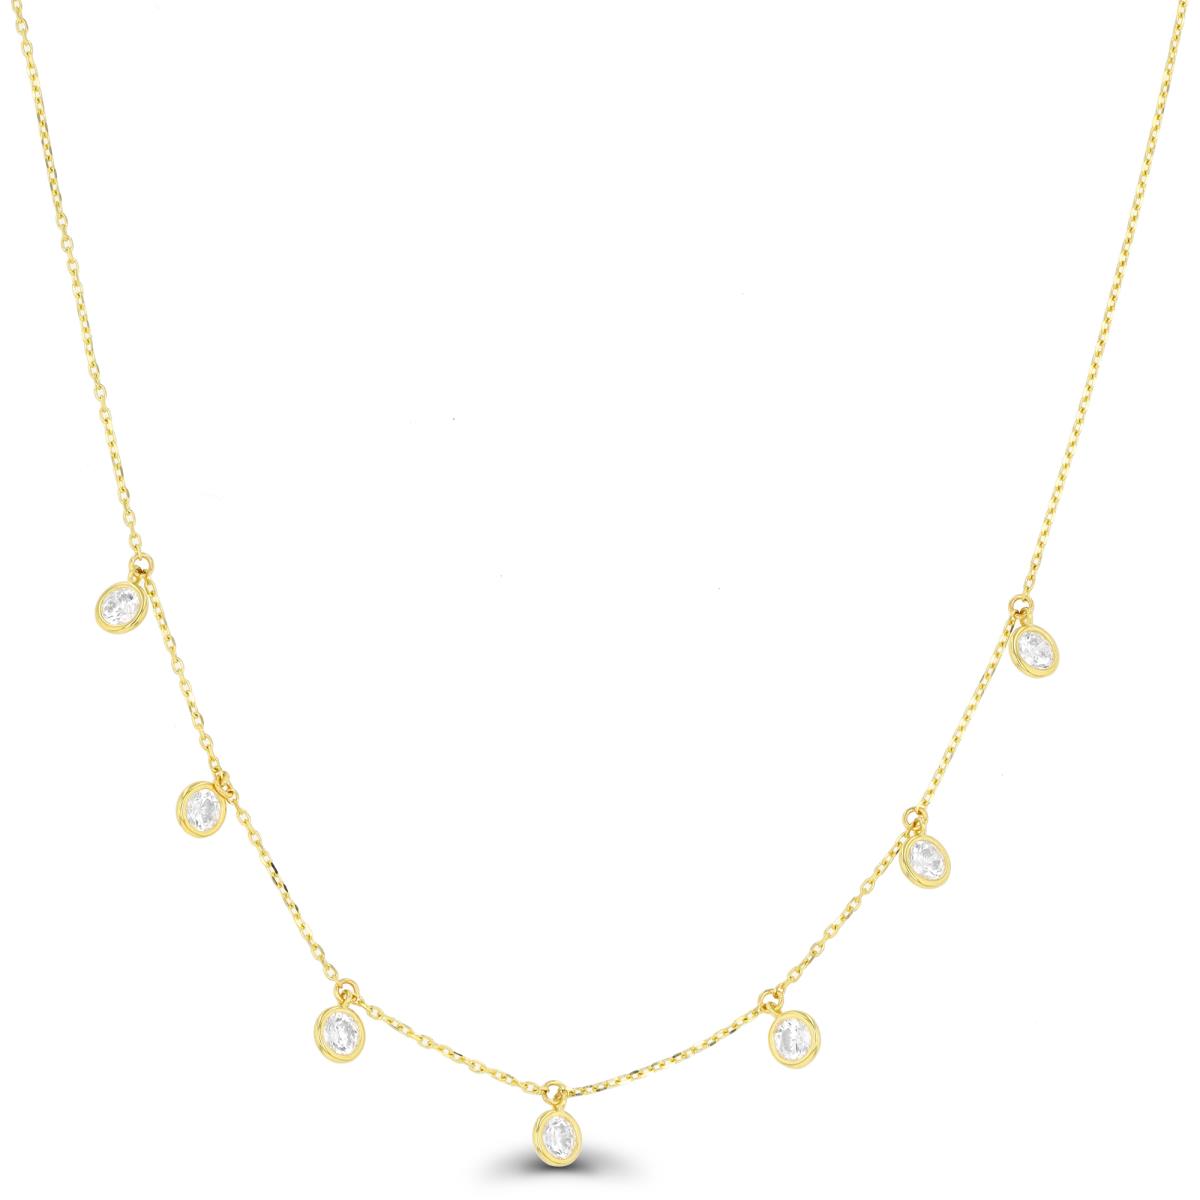 14K Yellow Gold 3mm Round Bezels 16"+2" Necklace